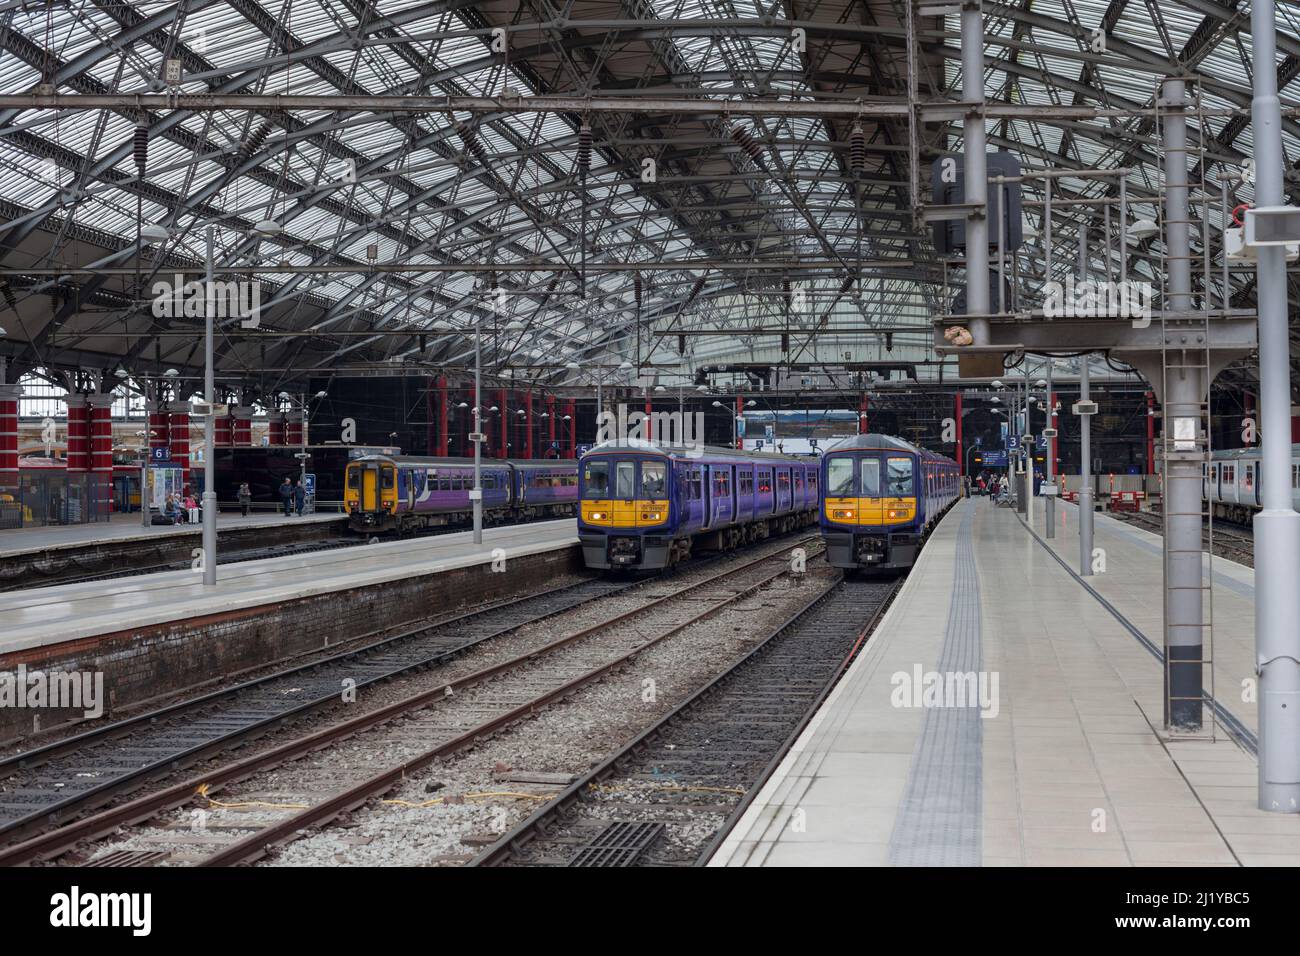 Northern rail class 319 electric multiple unit trains 319376 / 319377 at  Liverpool Lime Street  railway station with class 156 diesel 156460 (left) Stock Photo